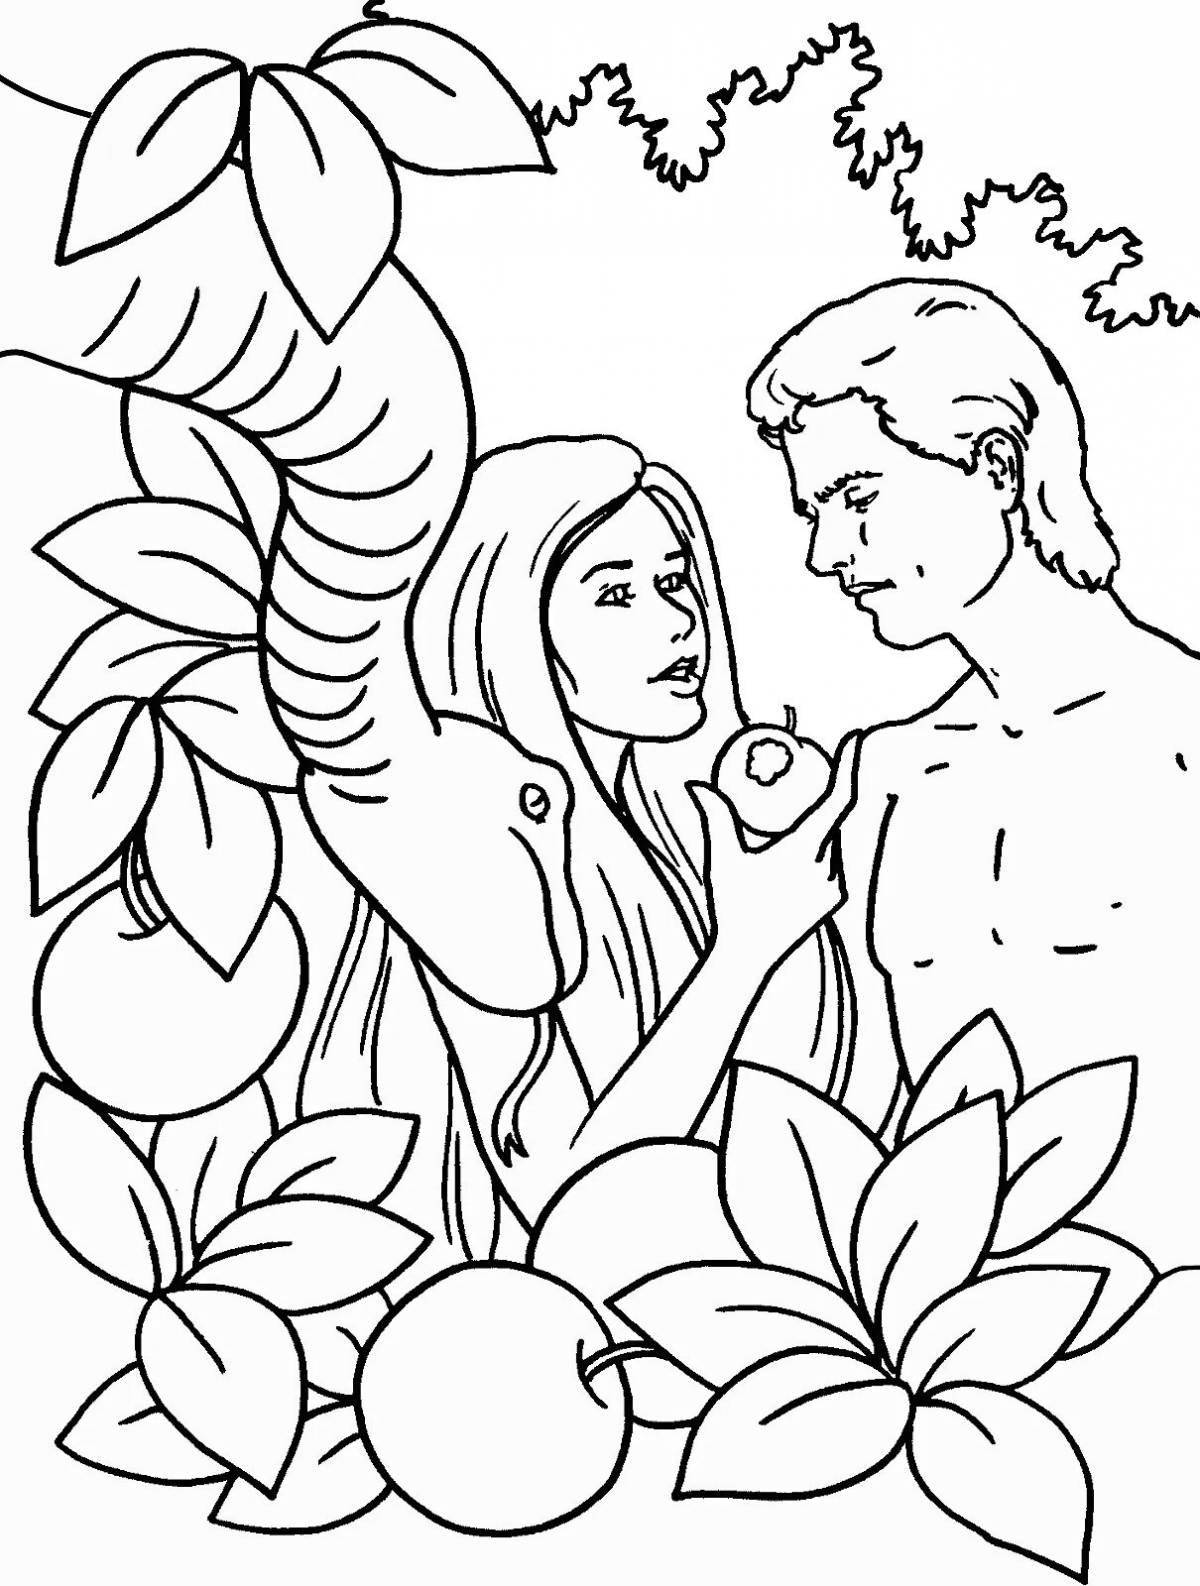 Coloring funny adam and eve